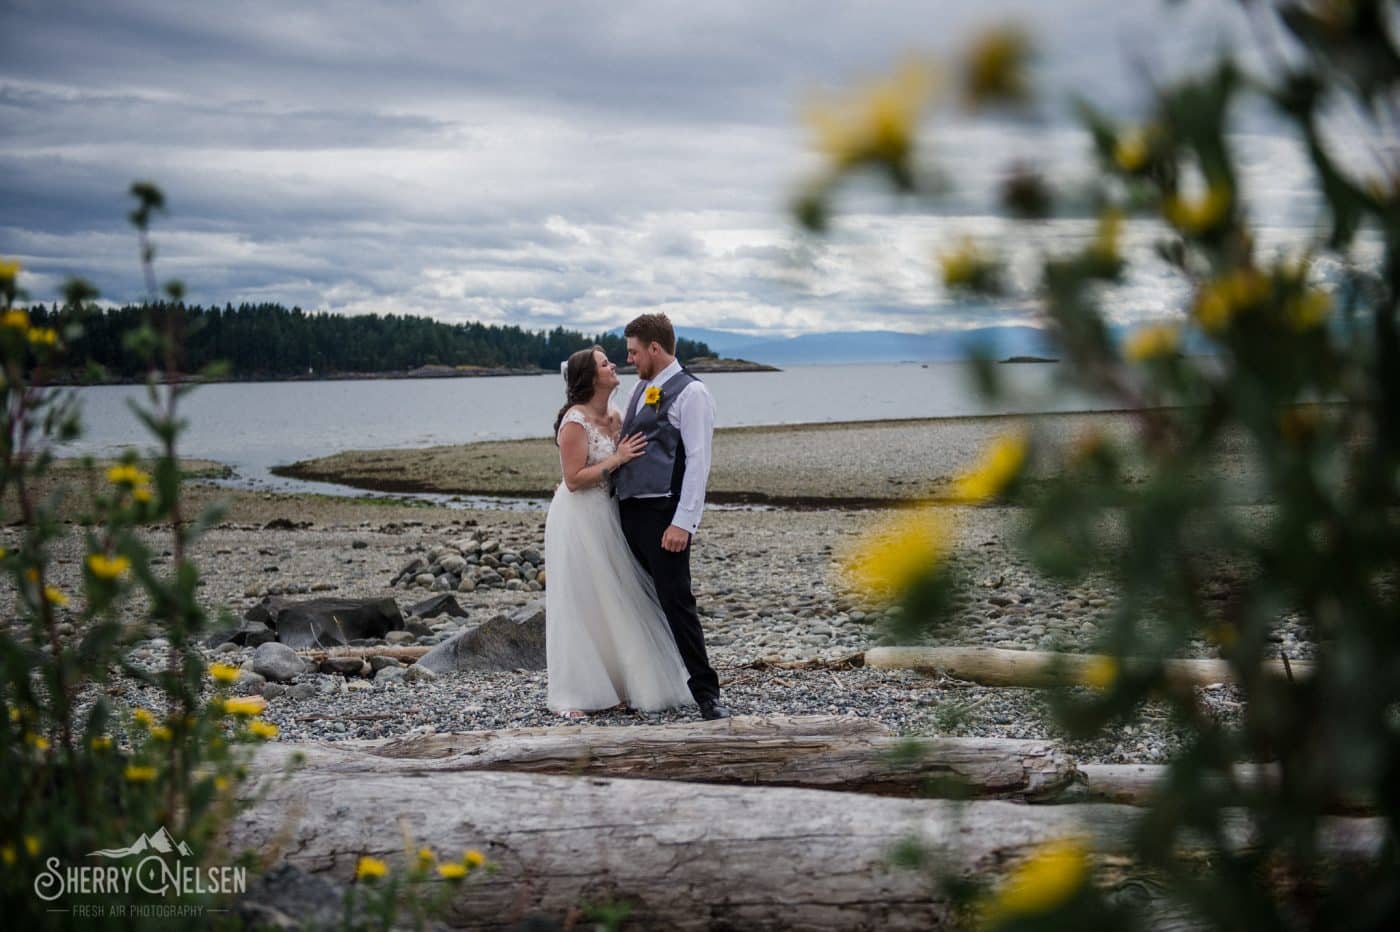 Shane and Shelby pose on the beach on driftwood logs for their Sechelt BC wedding